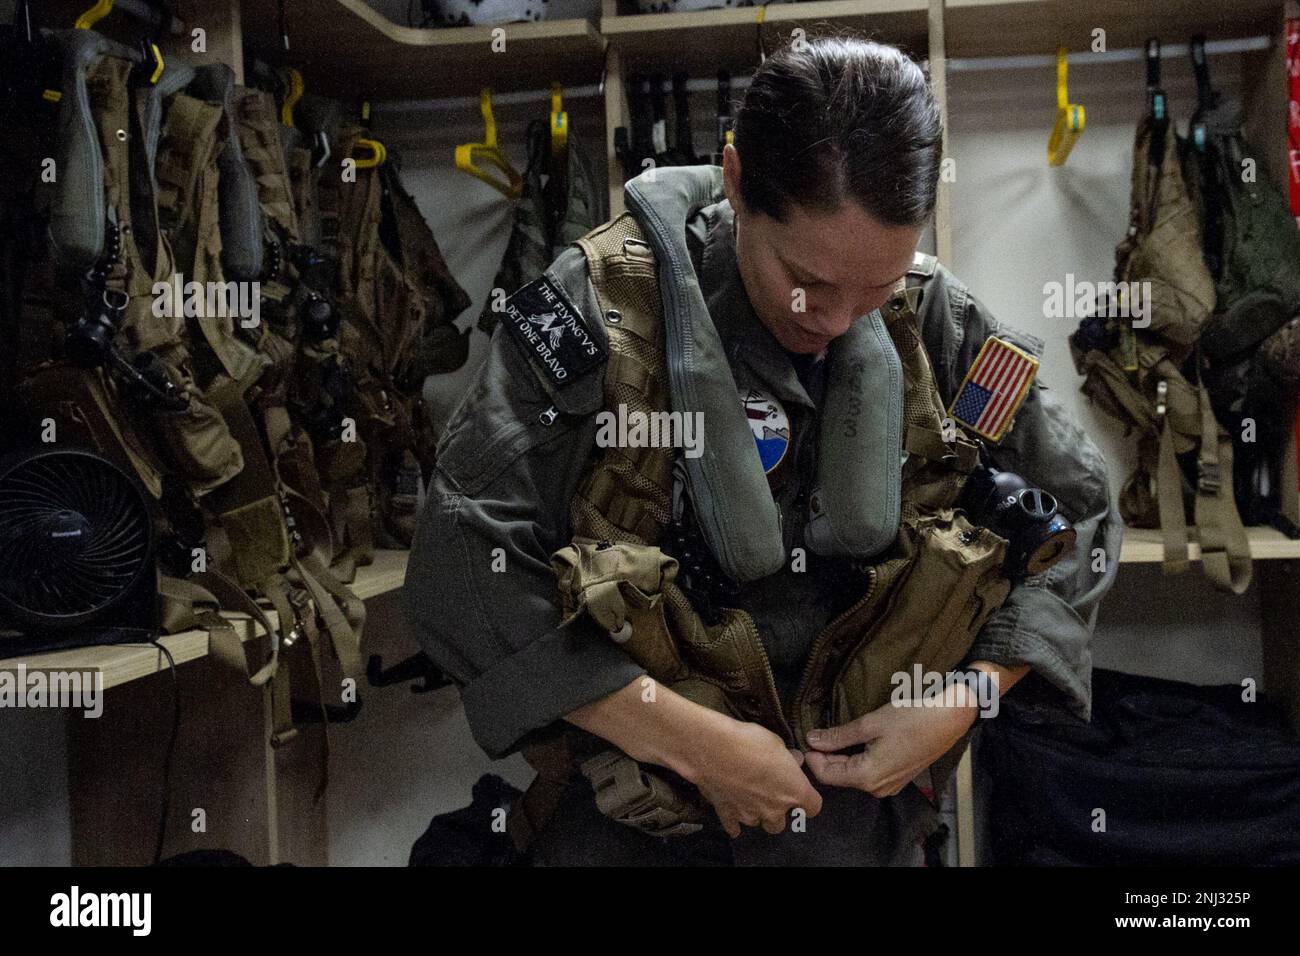 NAVAL STATION ROTA, Spain (August 4, 2022) Lt. Madalyn Thompson, a pilot with Helicopter Maritime Strike Squadron (HSM) 79, prepares for a flight, Aug. 4, 2022. Stock Photo